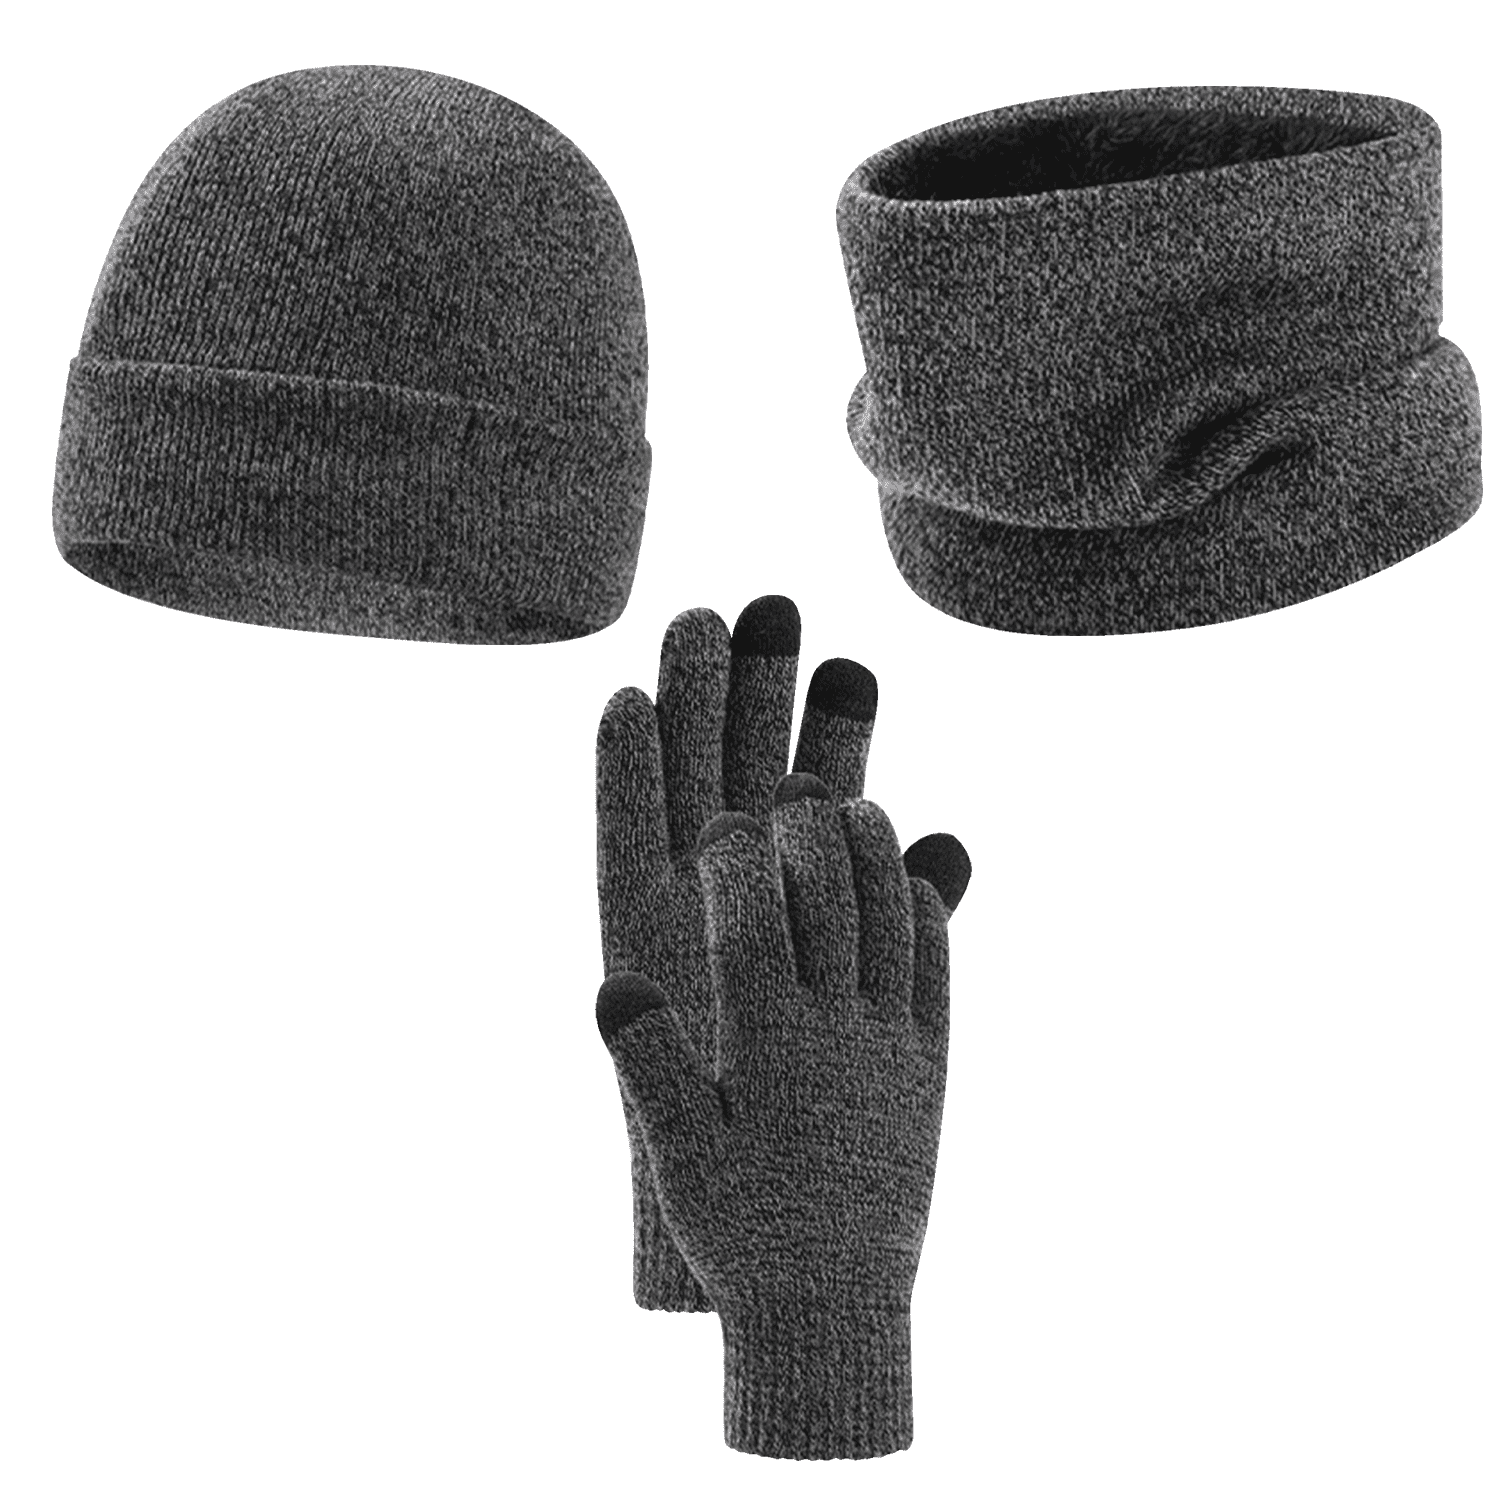 Maylisacc 3Pcs Winter Beanie Hat Thermal Snood Scarf and Knitted Touchscreen Gloves Mens Women with Thick Soft Fleece Lining